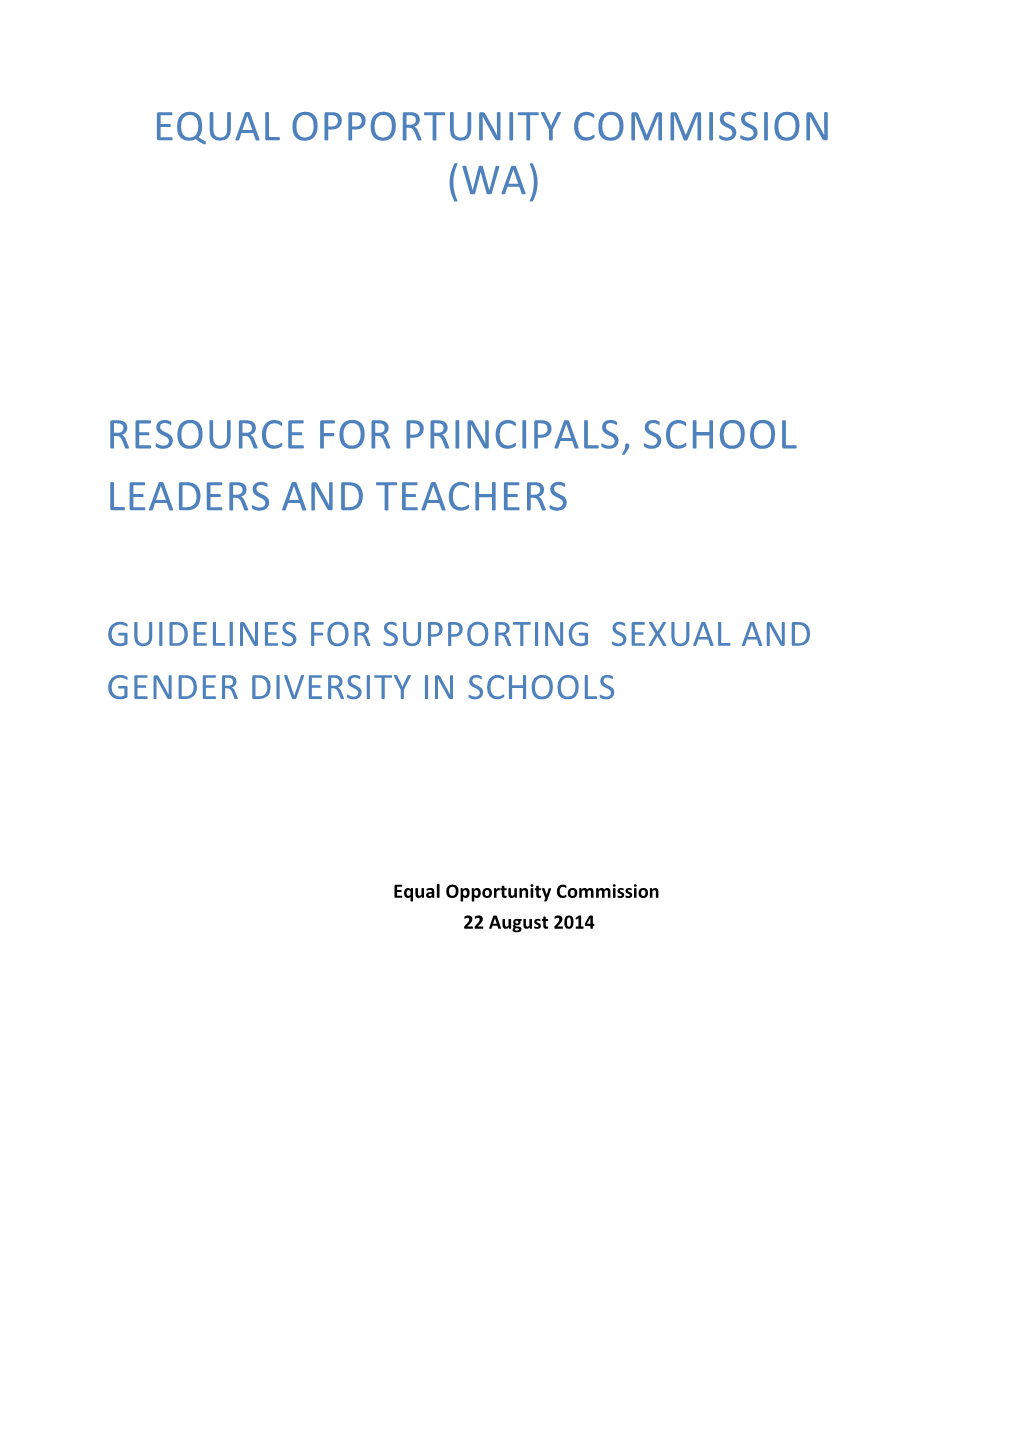 Resource for Principals, School Leaders and Teachers